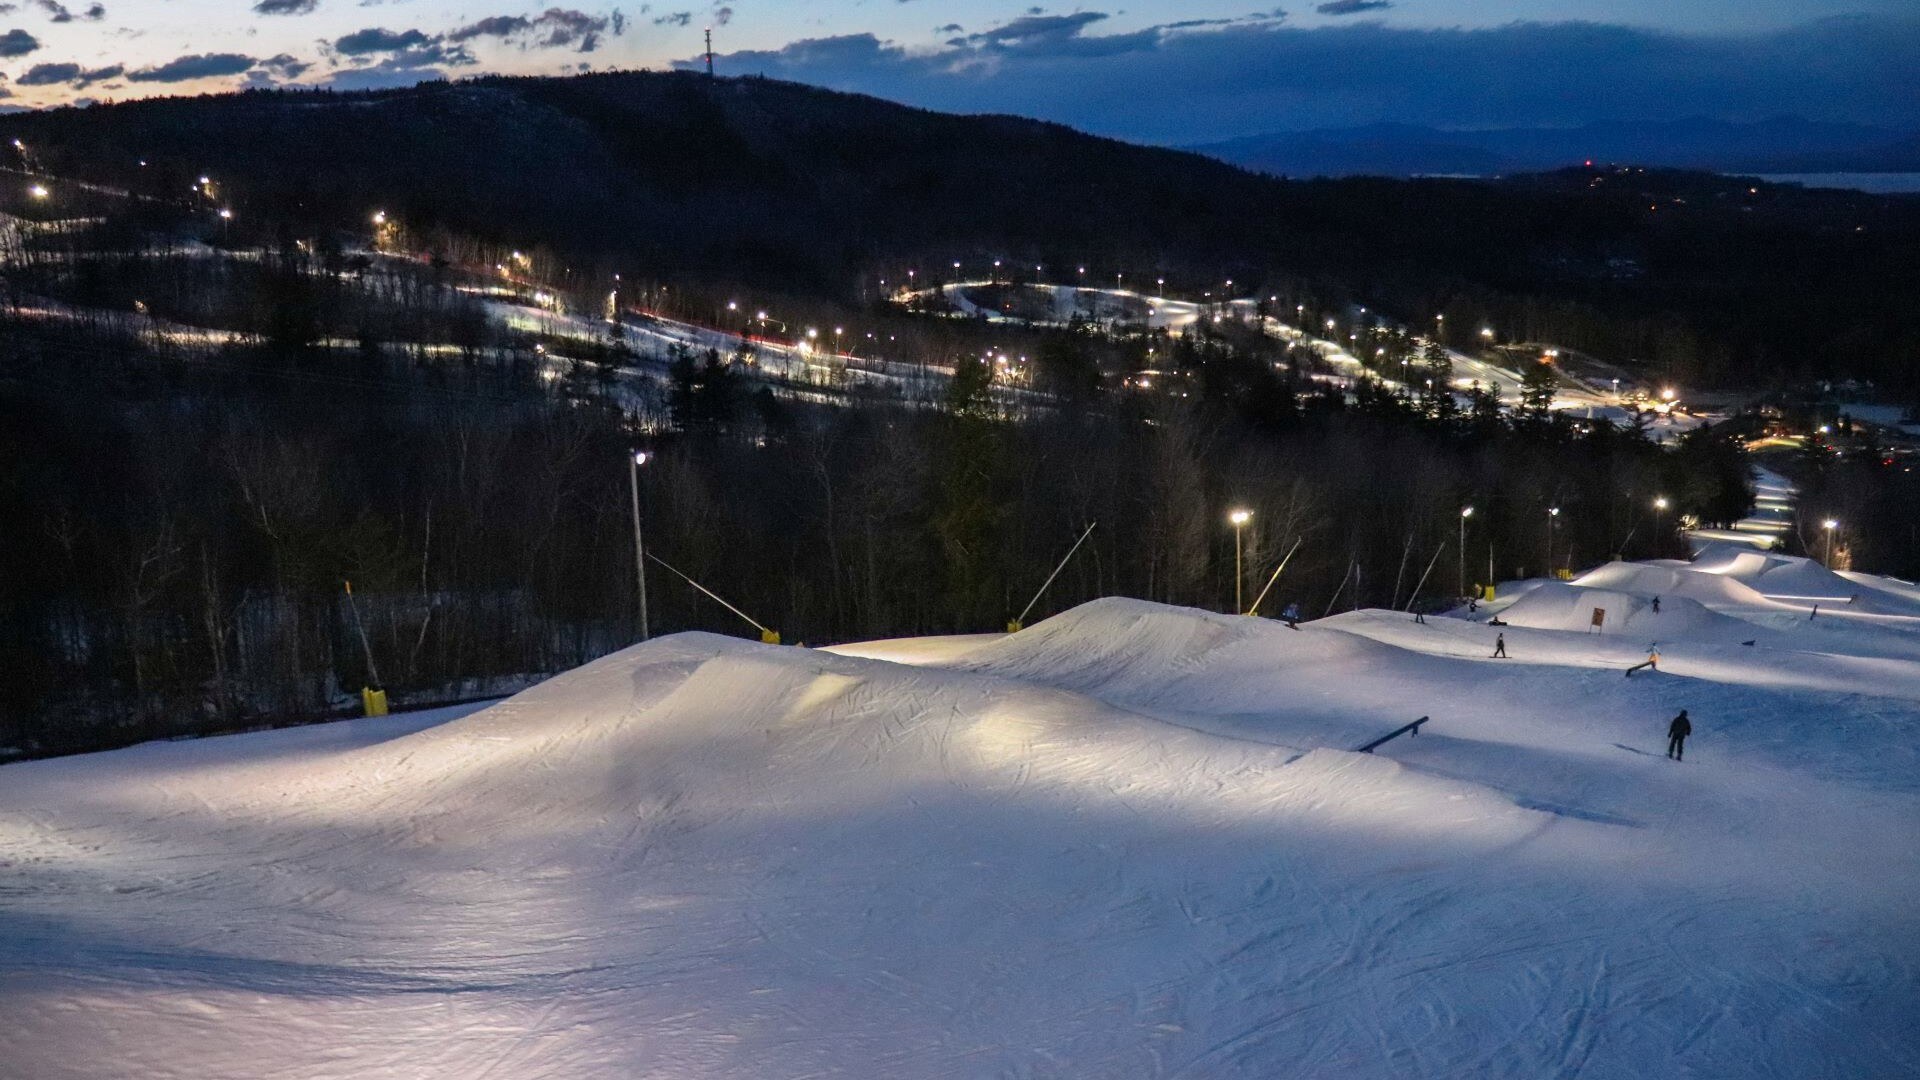 Blundersmoke Terrain Park at night with lights on.